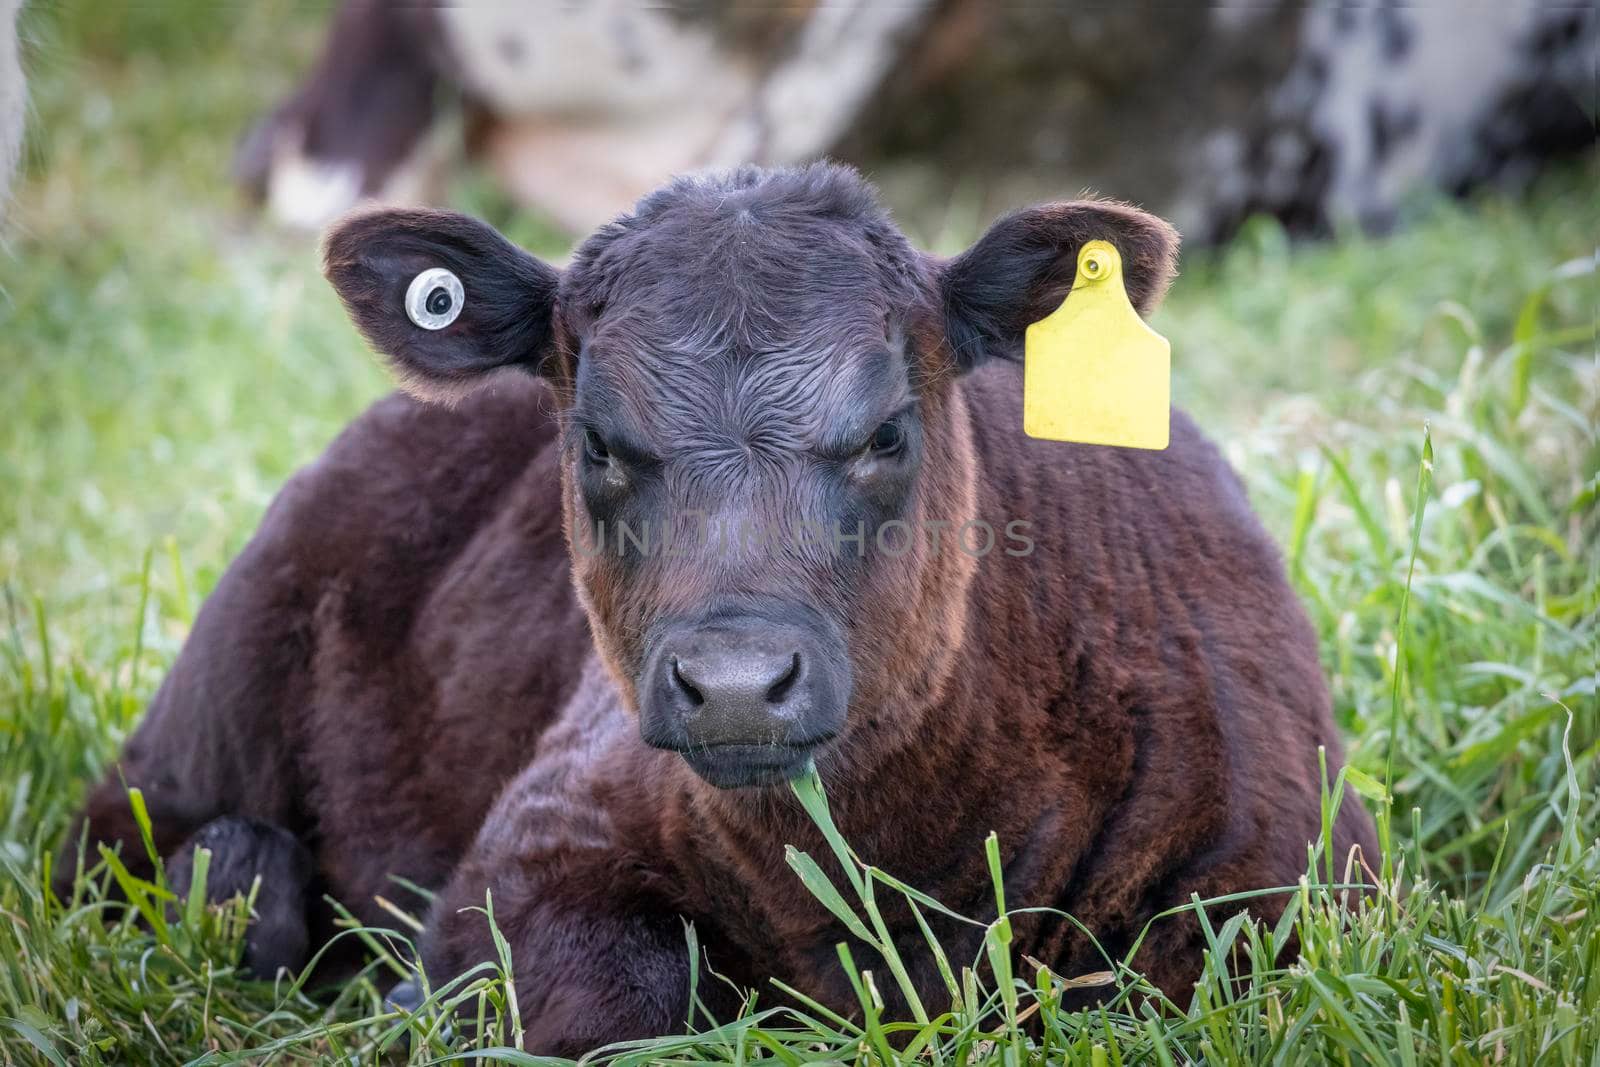 A brown calf sitting on the ground in a green pasture staring directly ahead in regional Australia